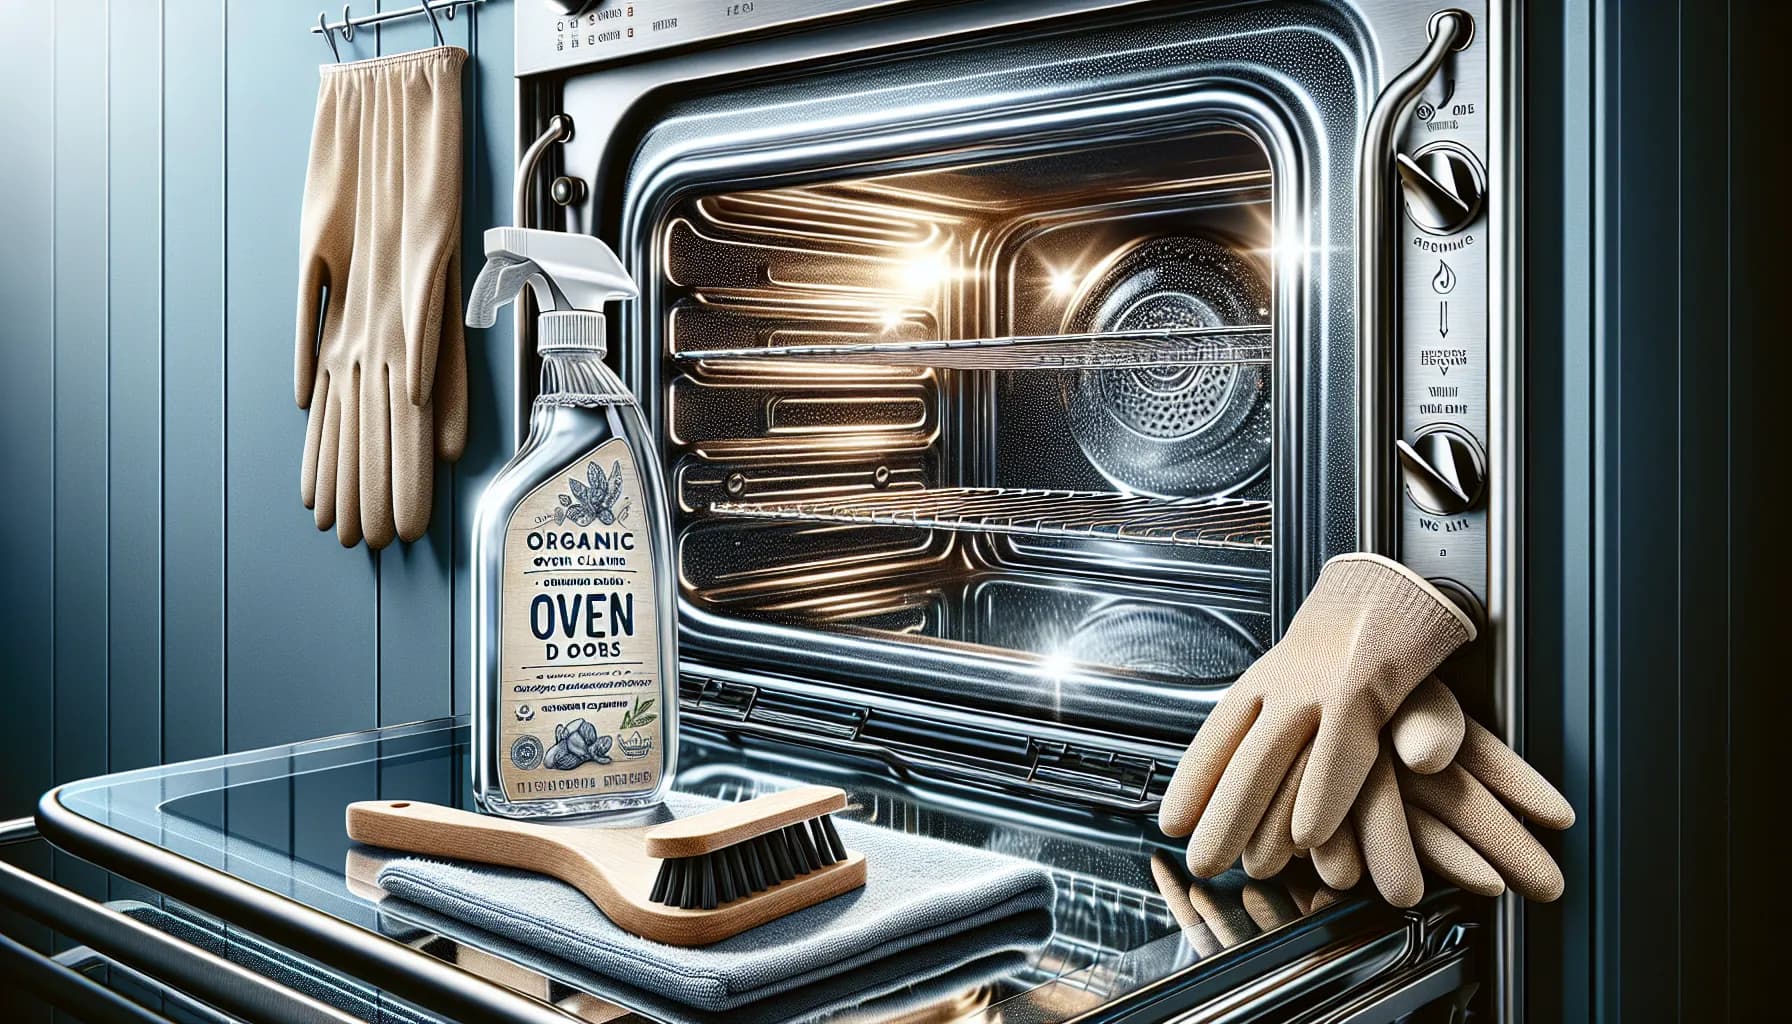 Sparkling clean oven door with organic cleaner, gloves, and cloth. Achieve maximum shine with our oven cleaning tips.